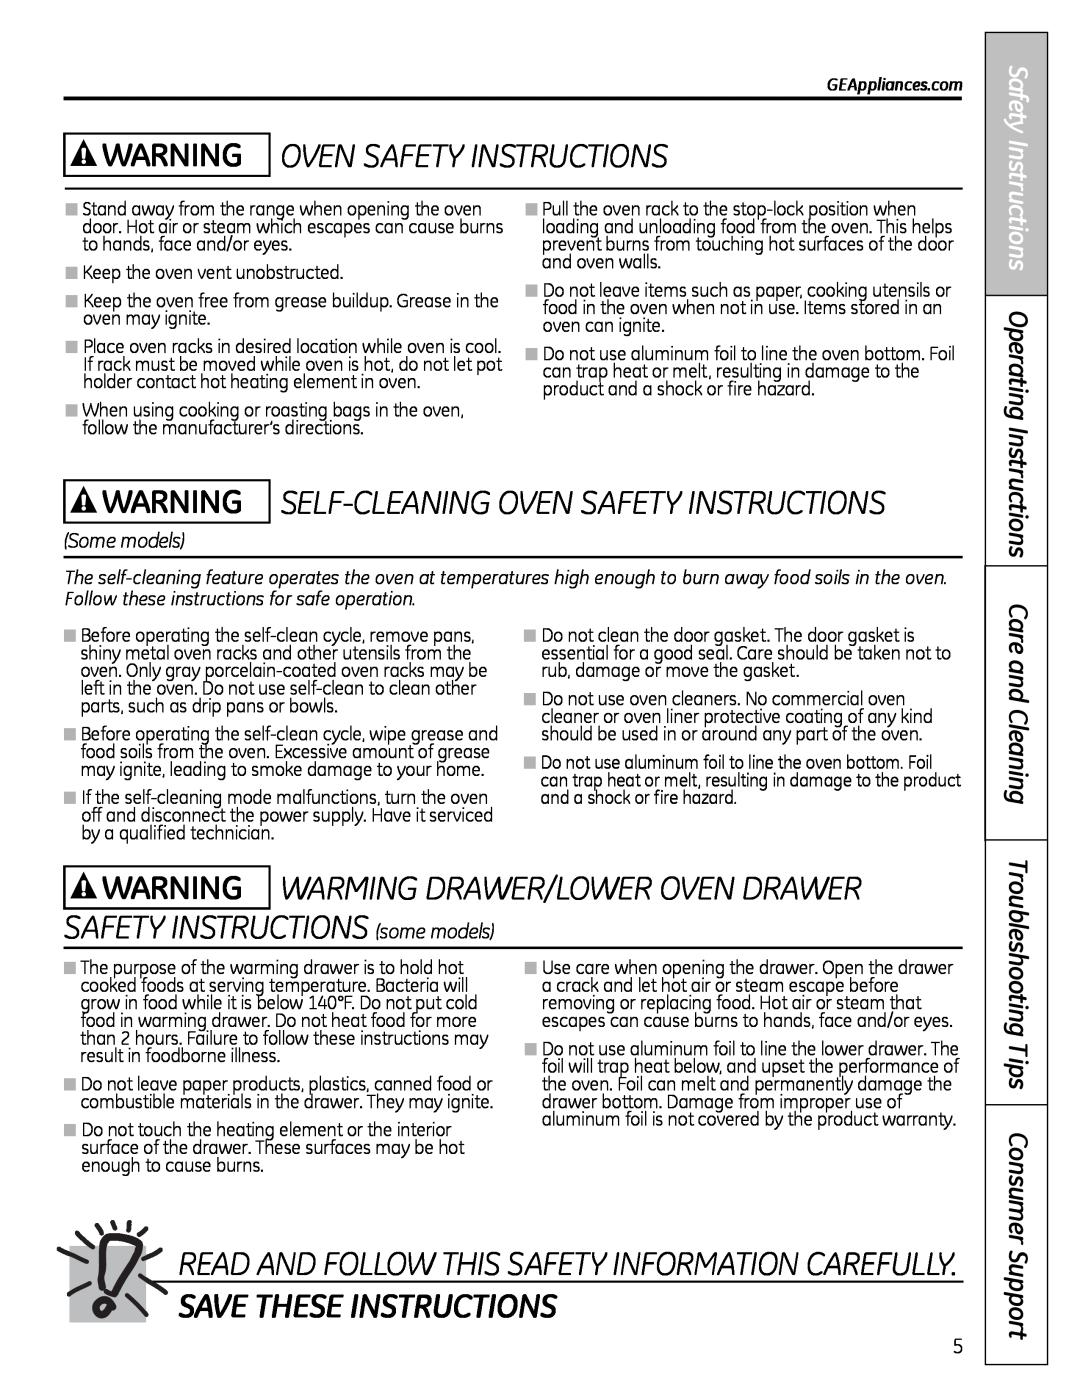 Hotpoint JBS03 WARNING OVEN SAFETY INSTRuCTIONS, WARNING SElF-ClEANING OVEN SAFETY INSTRuCTIONS, Save These Instructions 